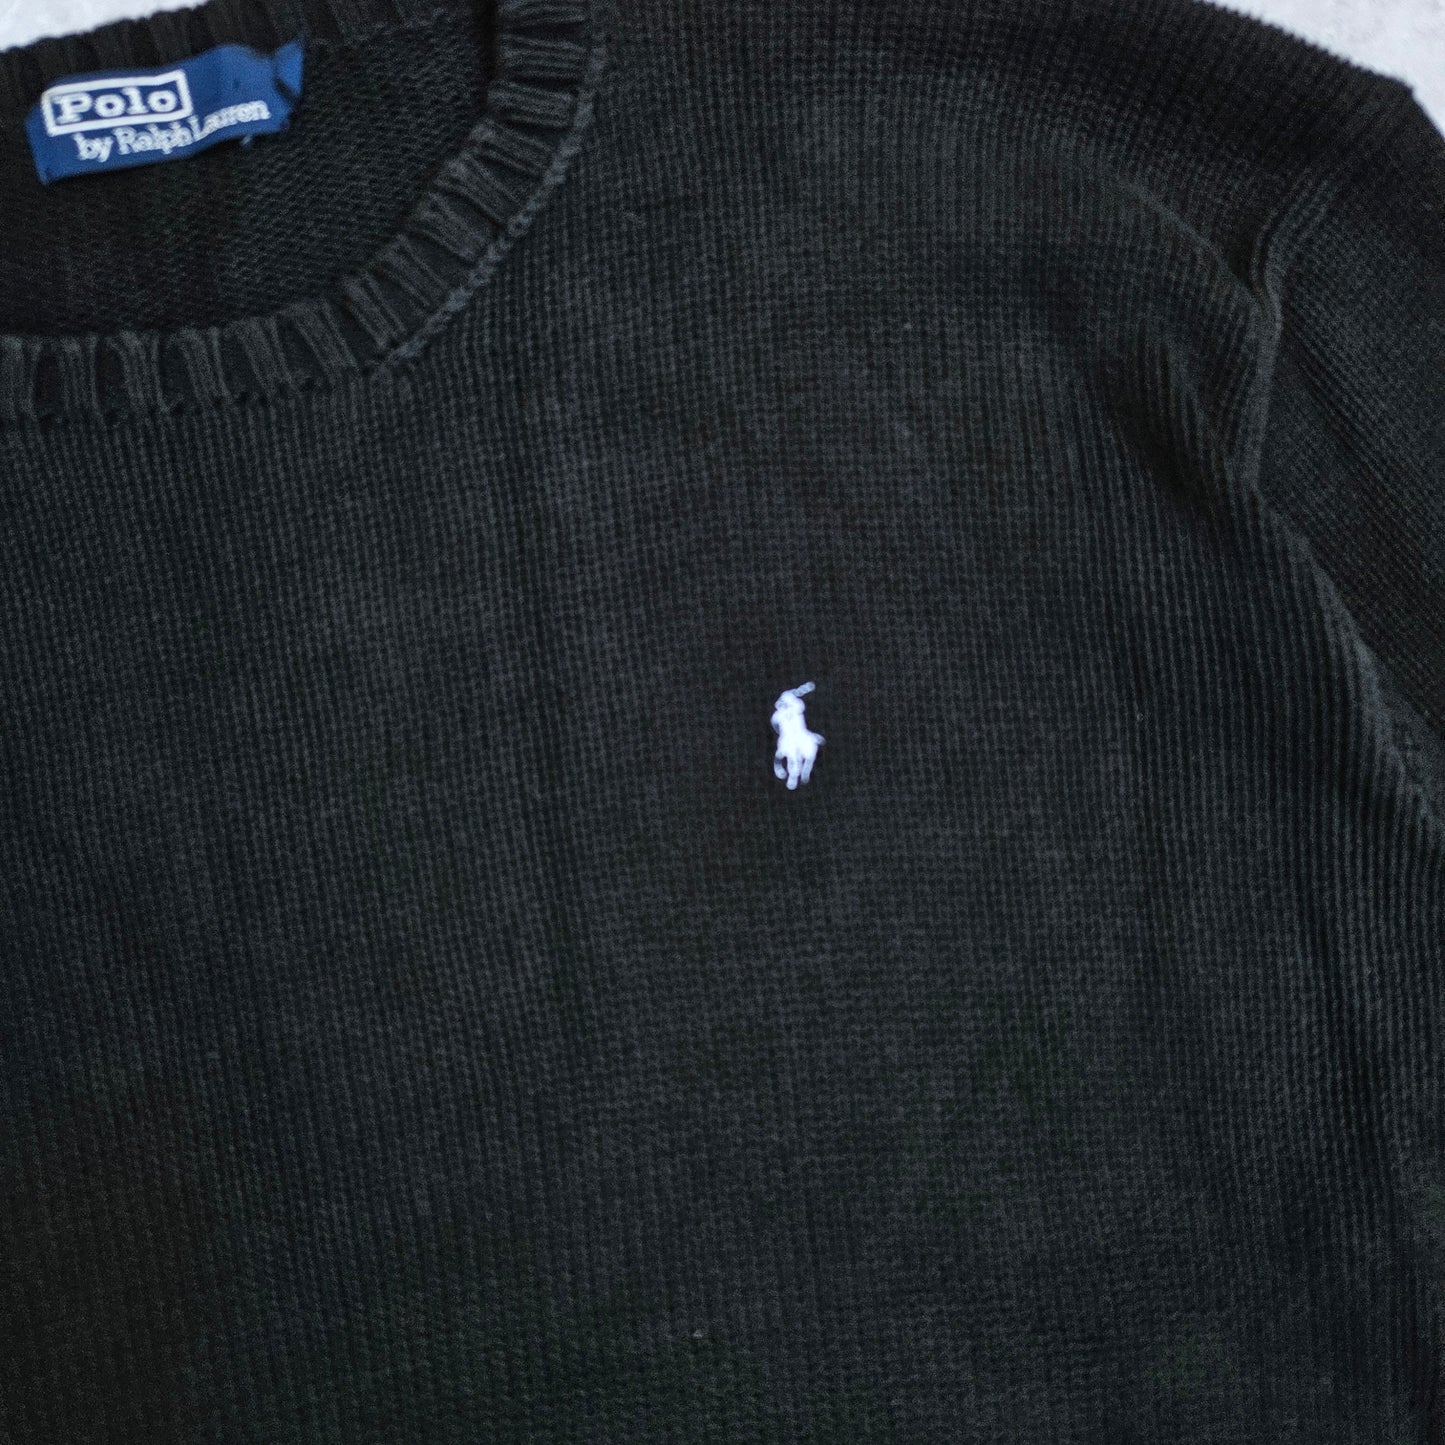 Vintage Polo Ralph Lauren Knitted Sweater (L)